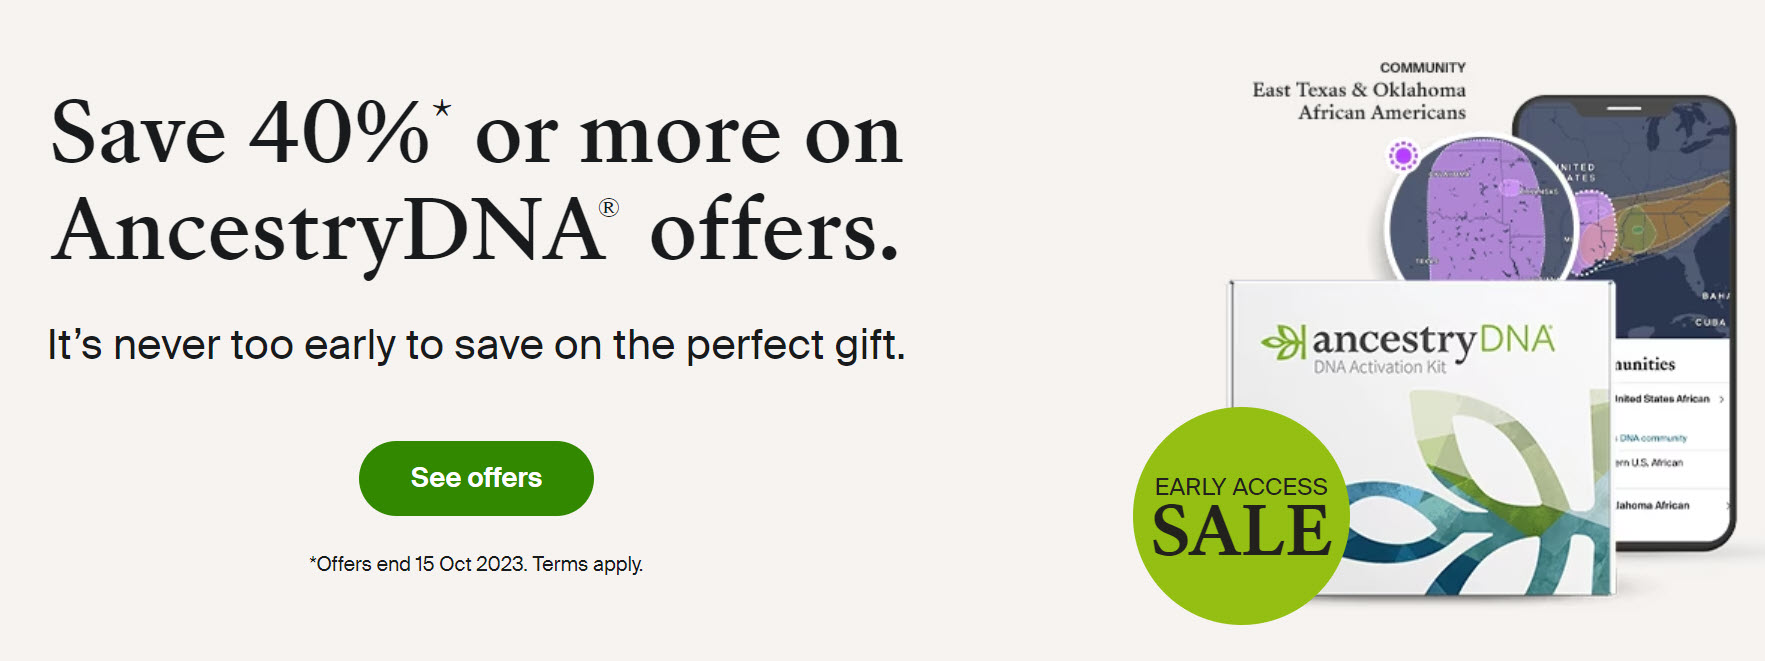 AncestryDNA Early Access Sale - Start Your Holiday Shopping NOW!